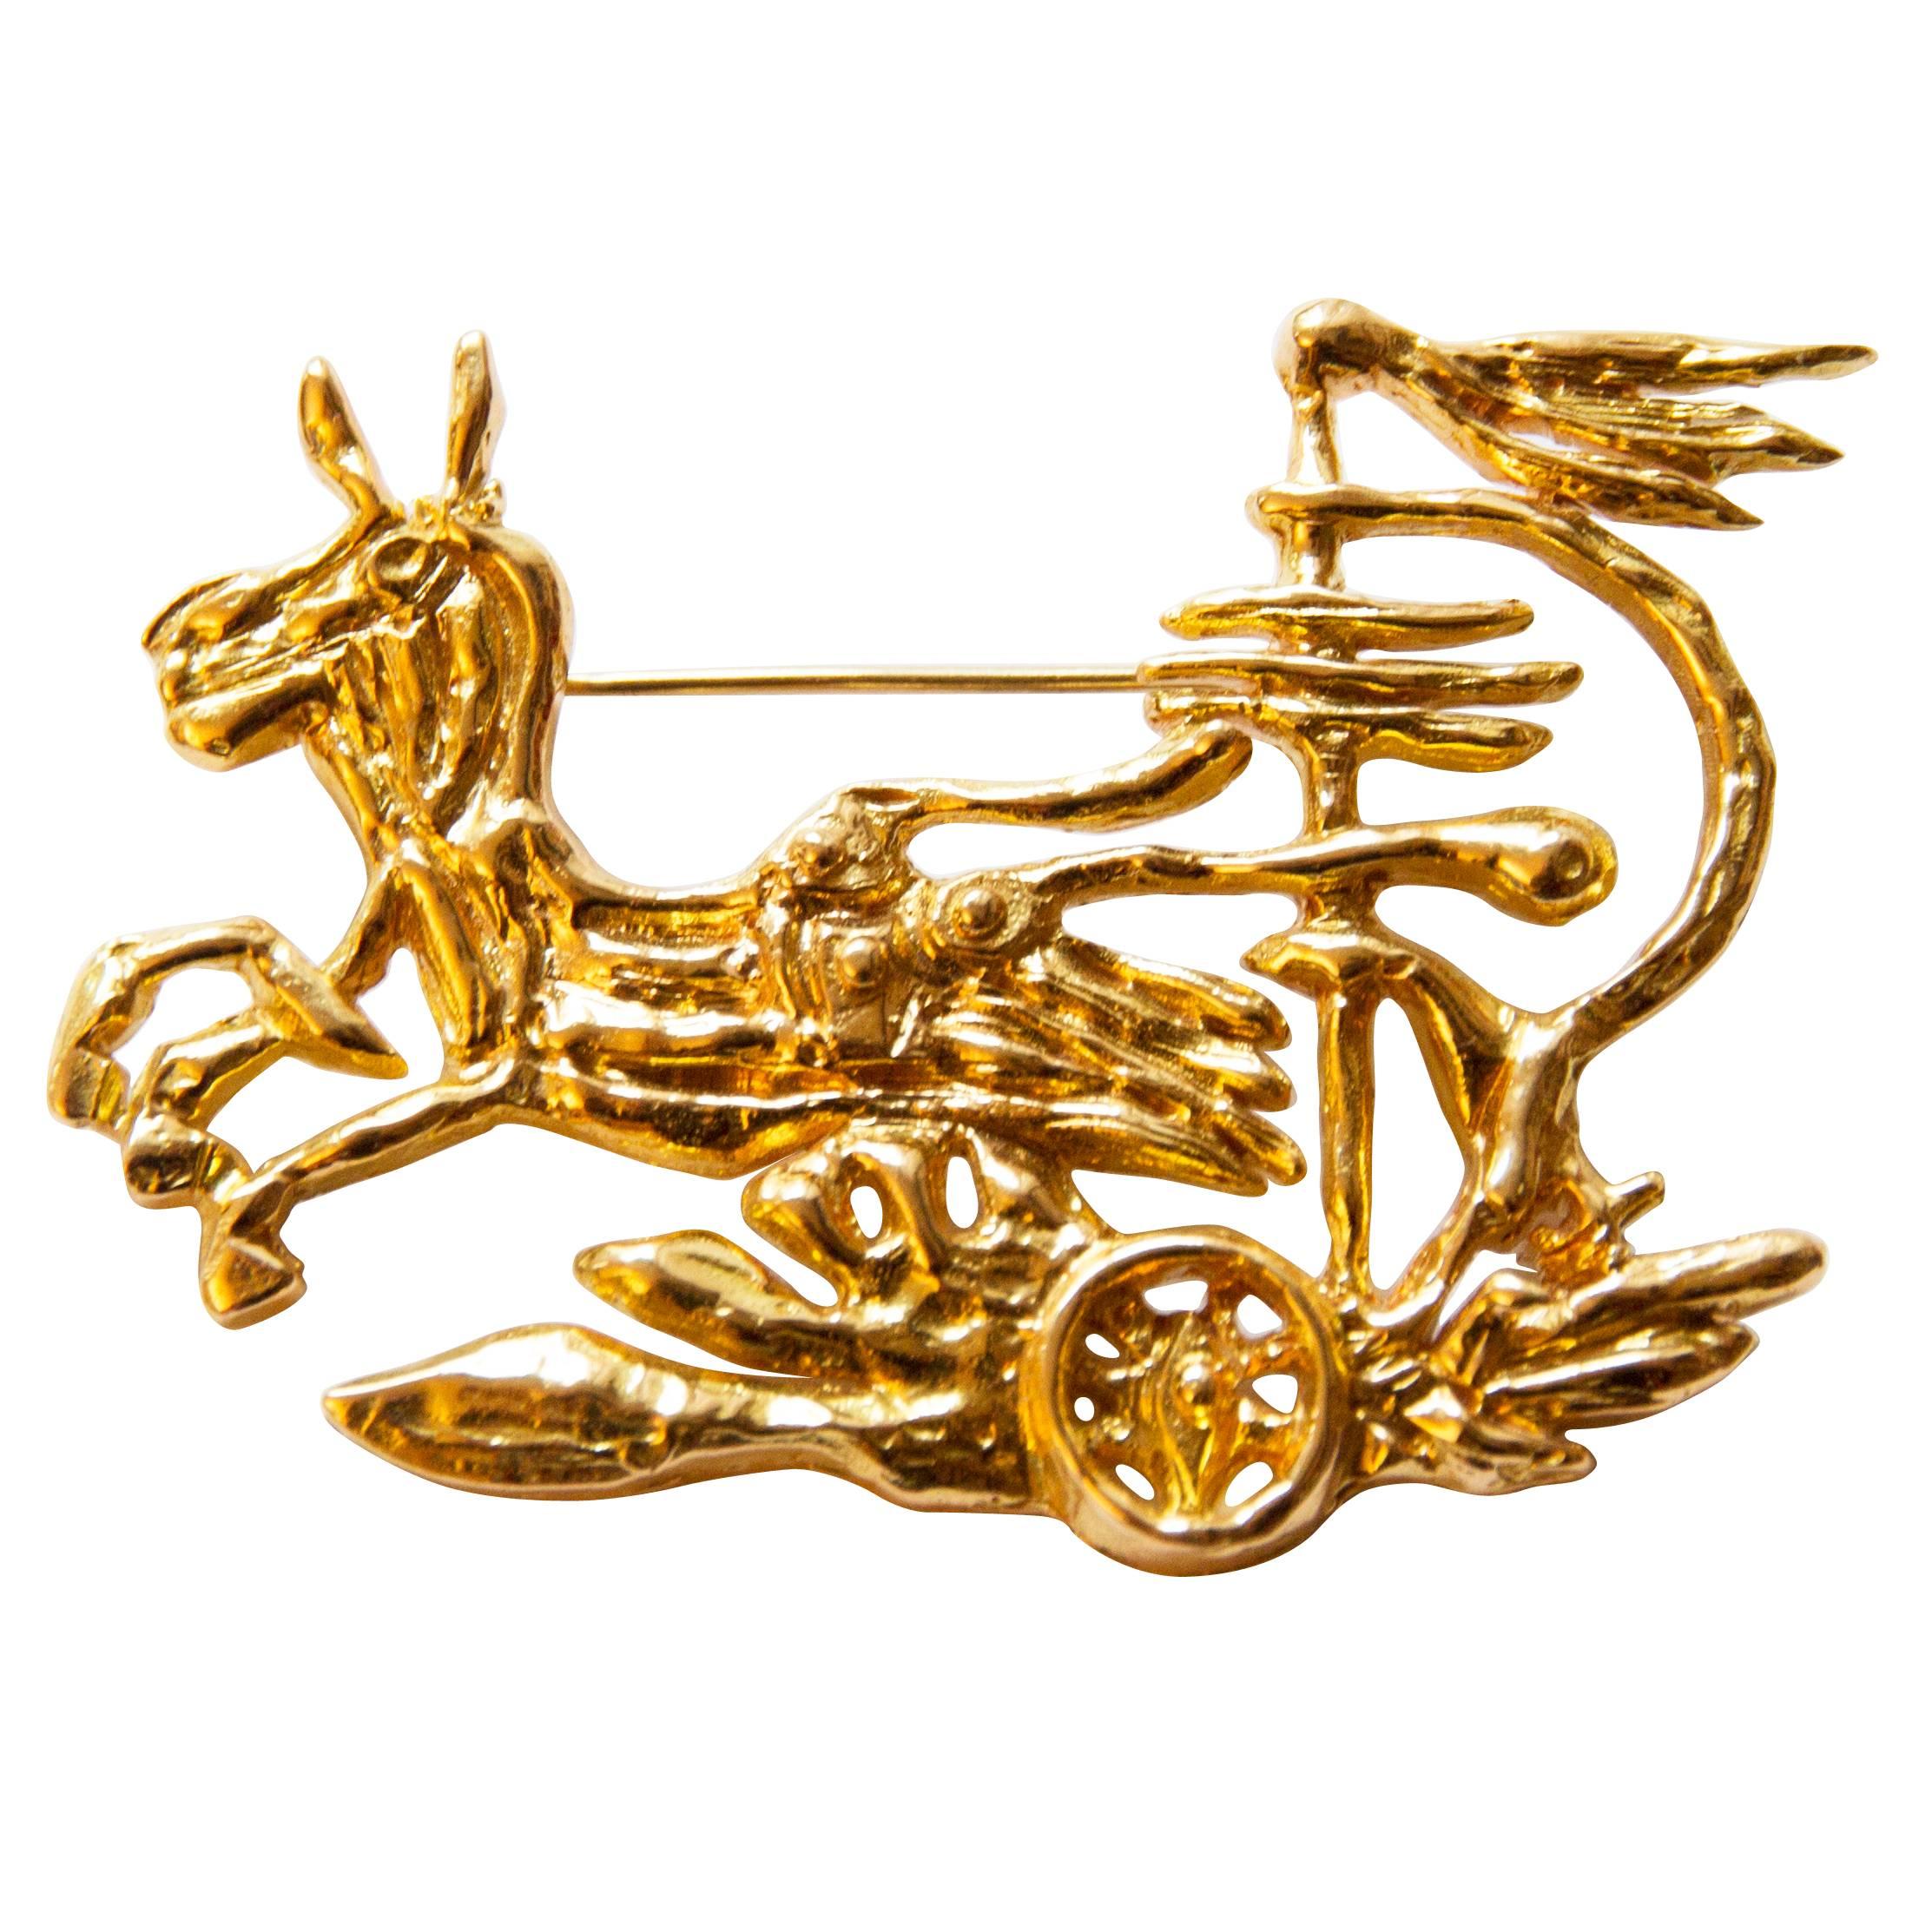 1963 Georges Braque "Medea's Chariot" Gold Brooch